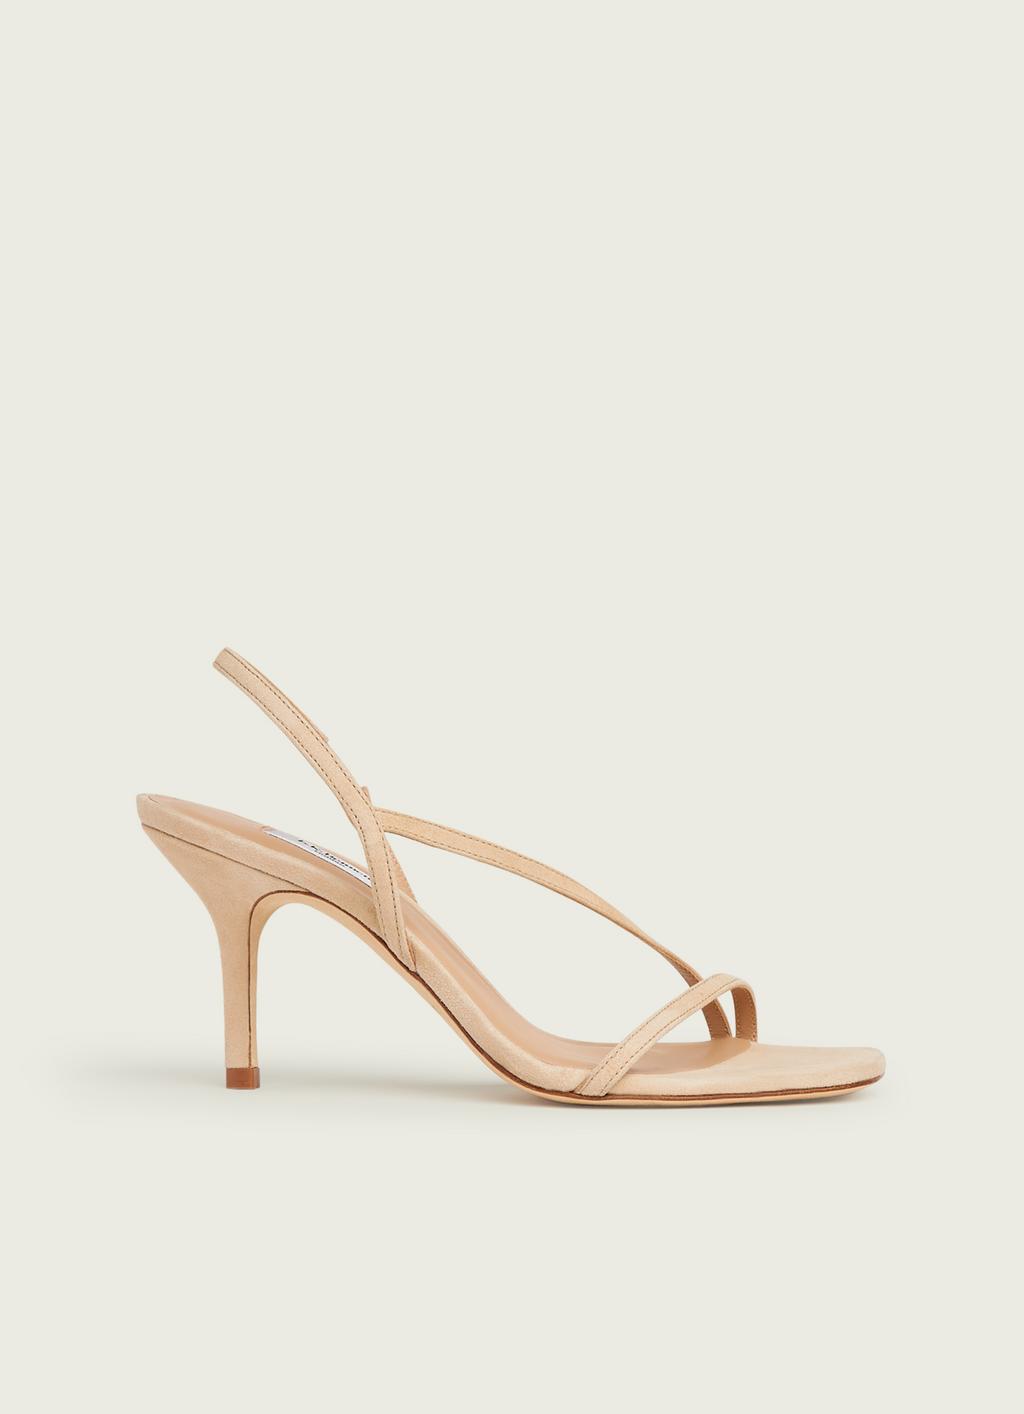 JustFab Strapped High-Heeled Sandals natural white casual look Shoes High-Heeled Sandals Strapped High-Heeled Sandals 